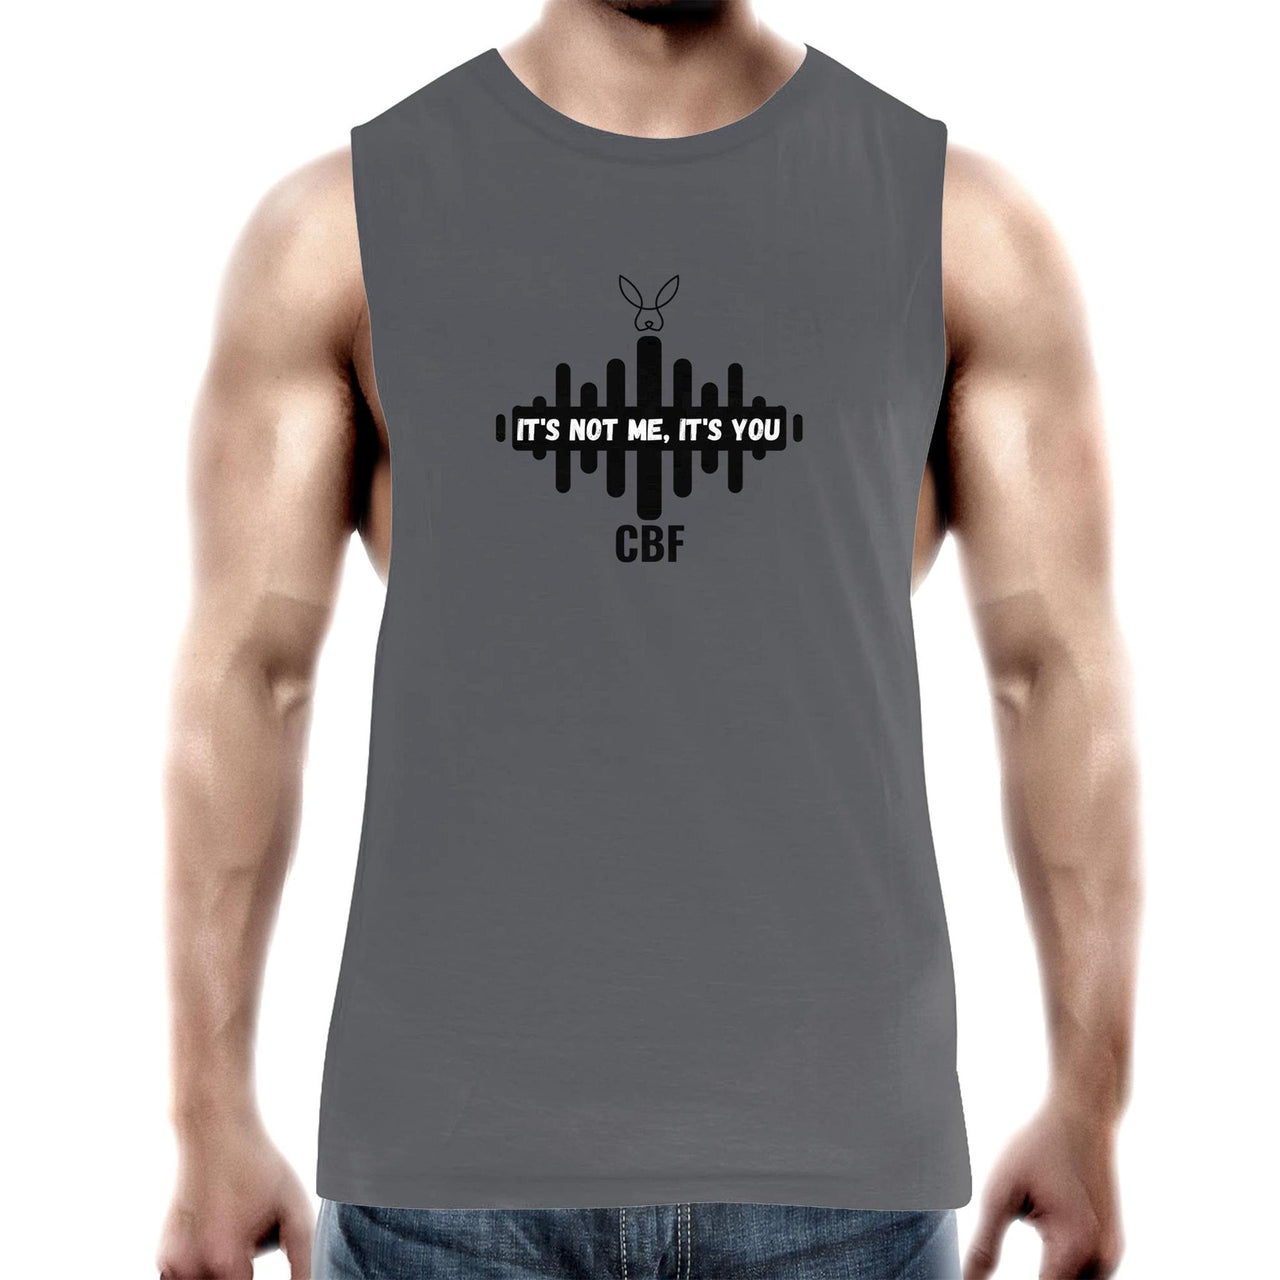 Not Me it's You Tank Top Tee by CBF Clothing in Grey